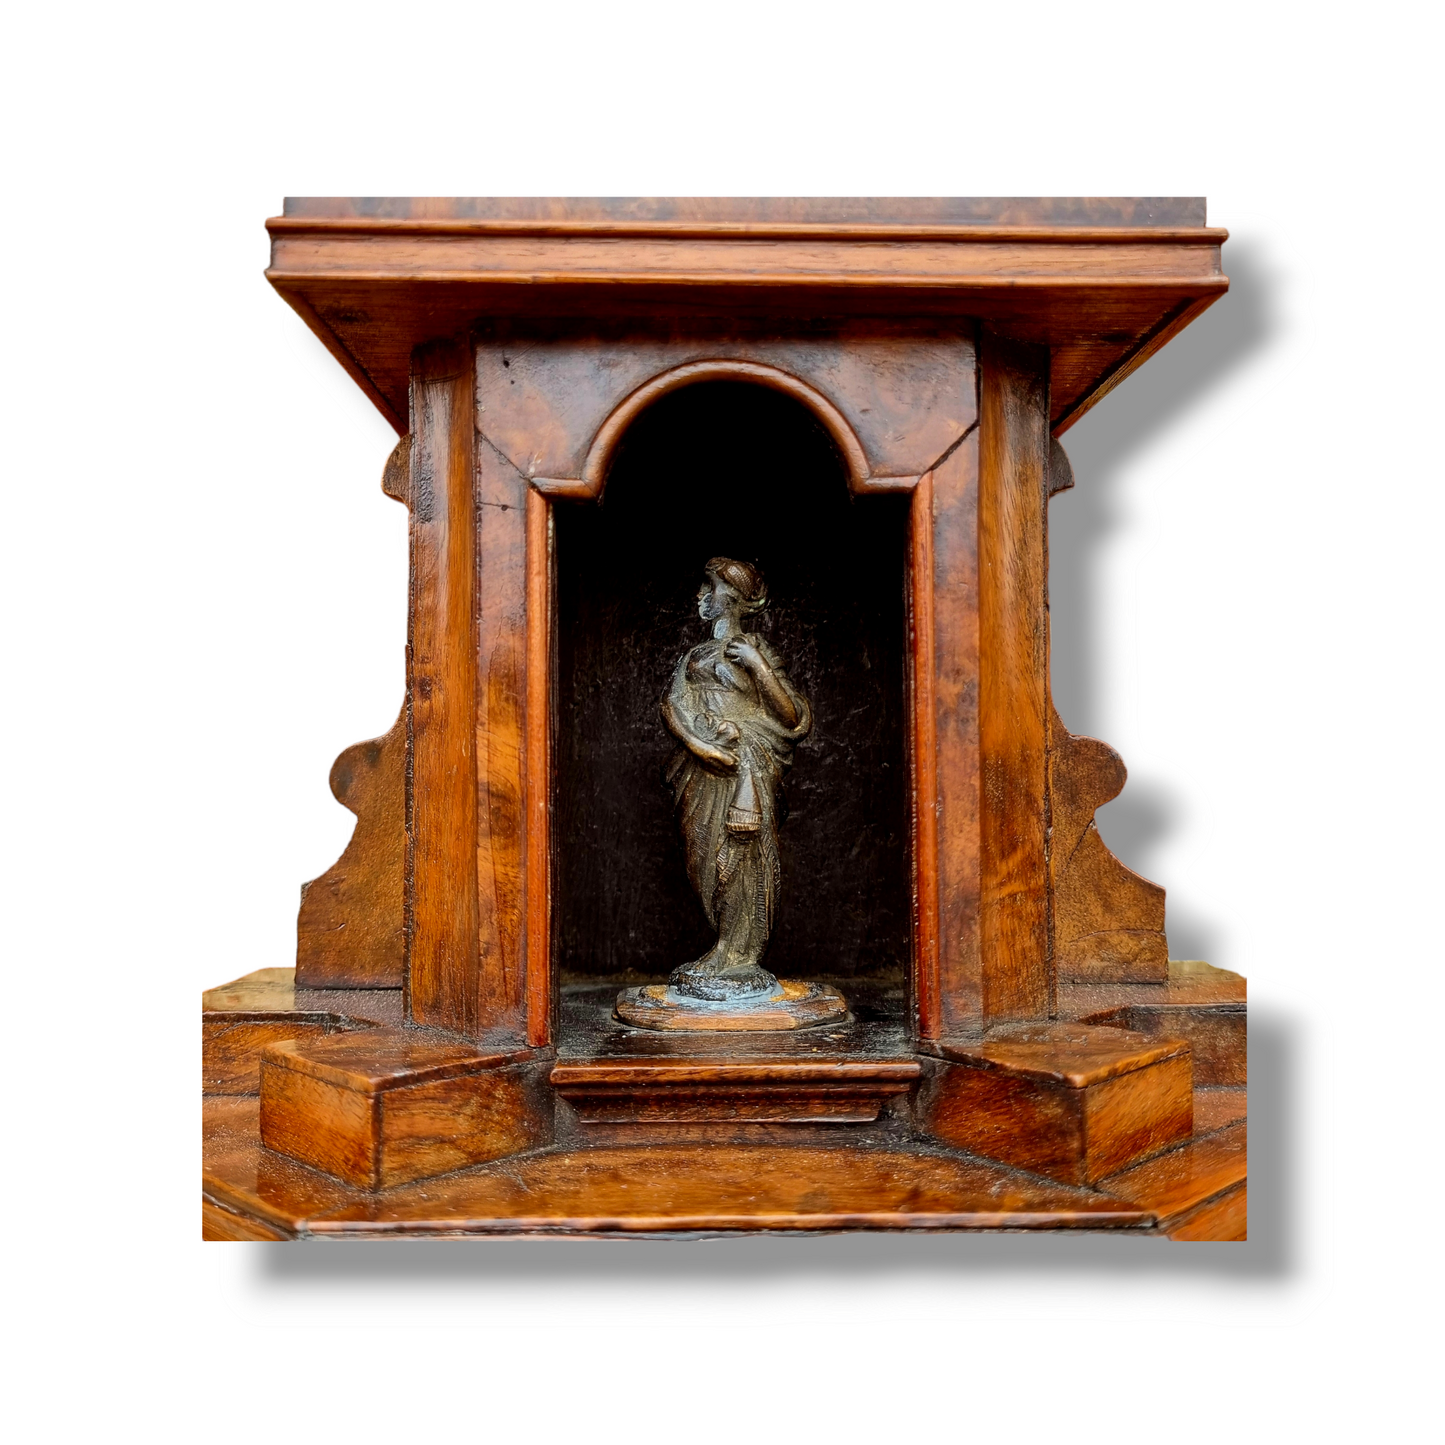 Grand Tour Interest - An 18th Century Italian Antique Walnut Architectural Model of a Roman Temple With a Classical Bronze Statue of Venus